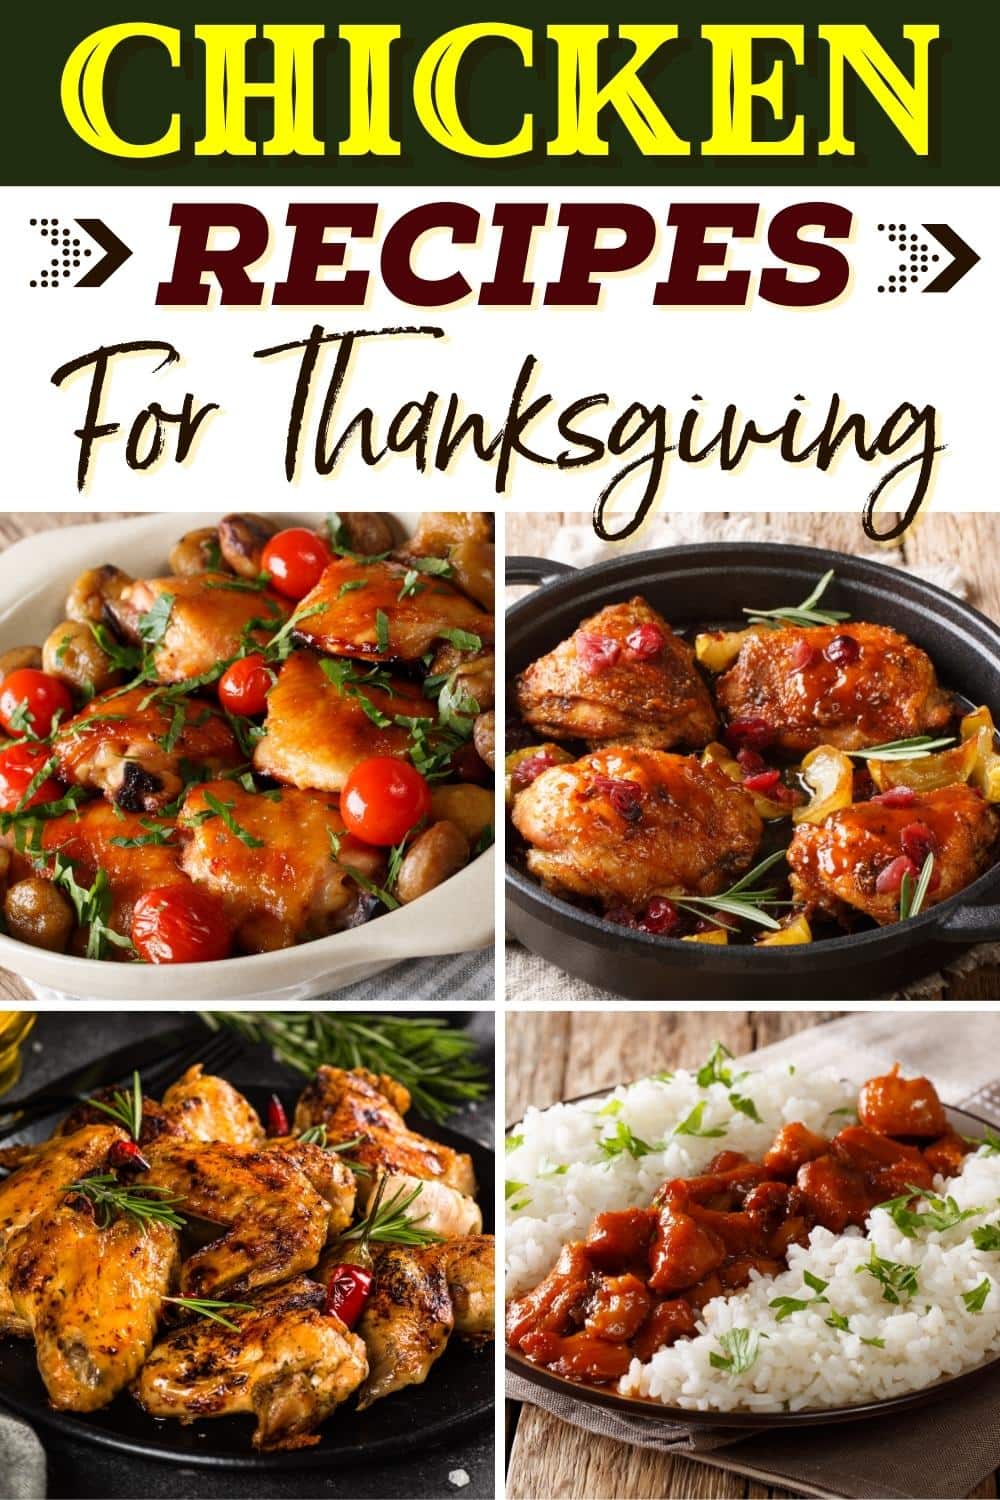 30 Best Chicken Recipes for Thanksgiving - Insanely Good